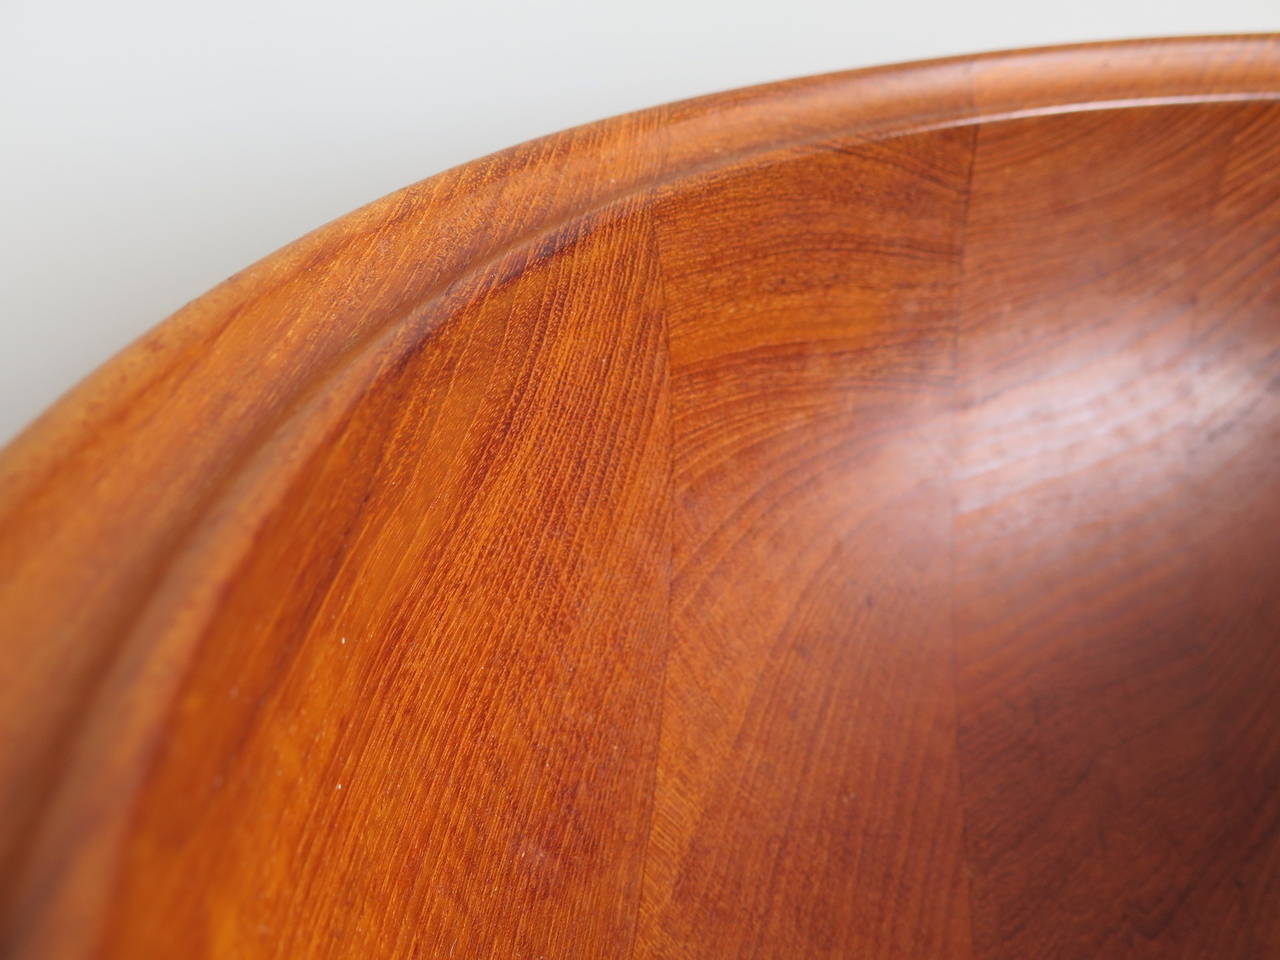 A large bowl in teak by Henning Koppel. Made in Denmark, retailed by George Jensen, includes original box when purchased, circa 1960s